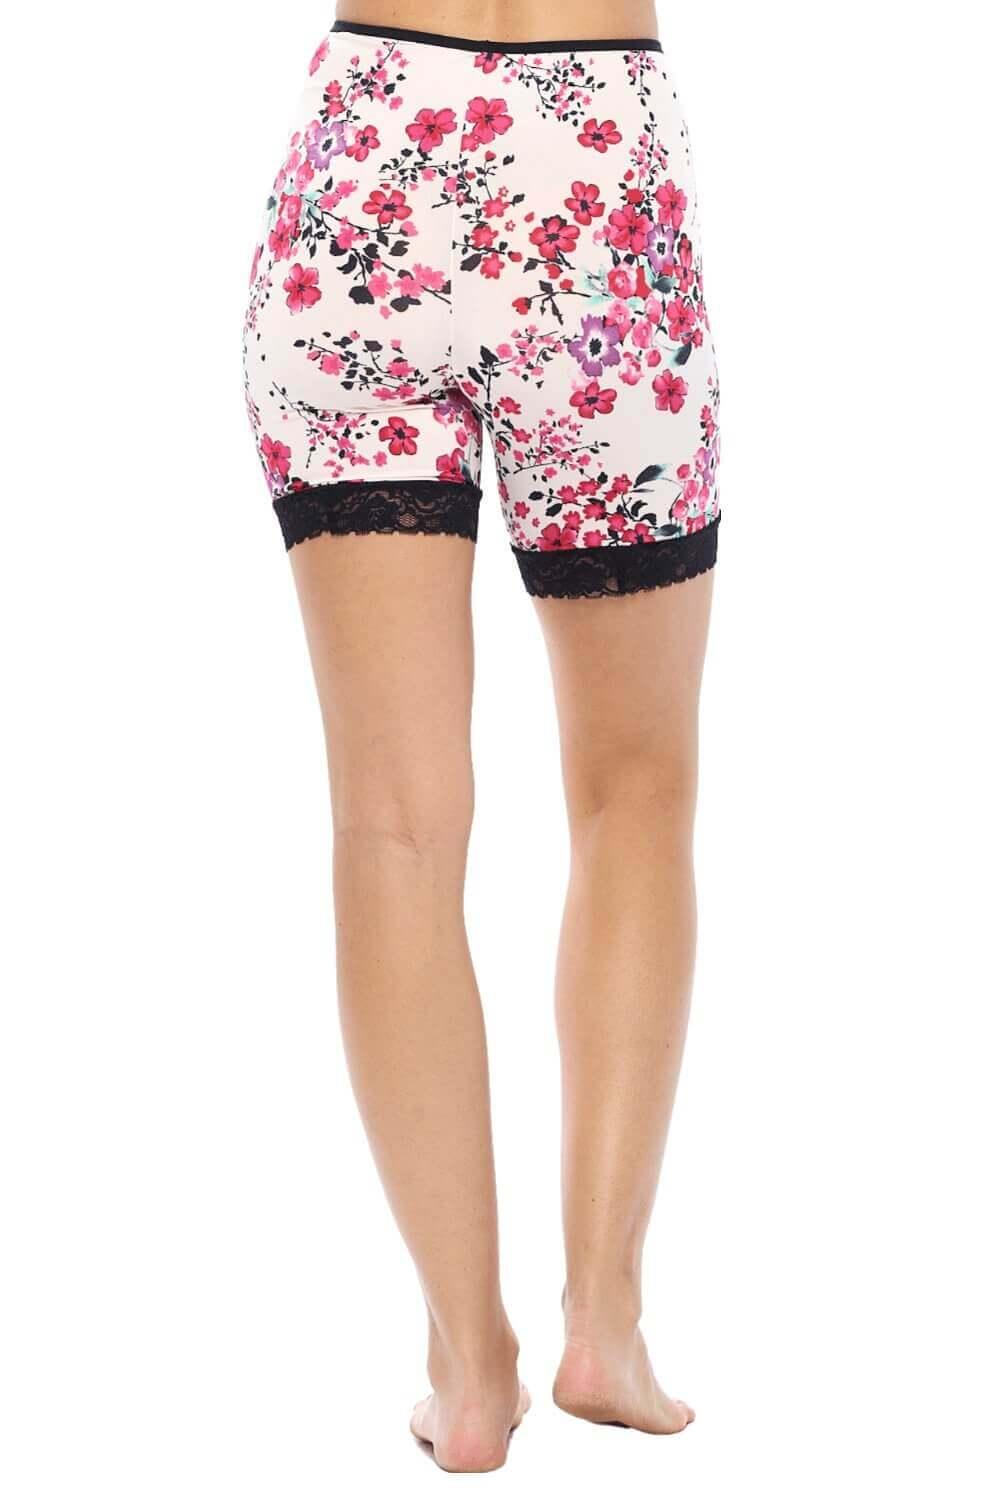 thigh shorts for under dresses Undersummers